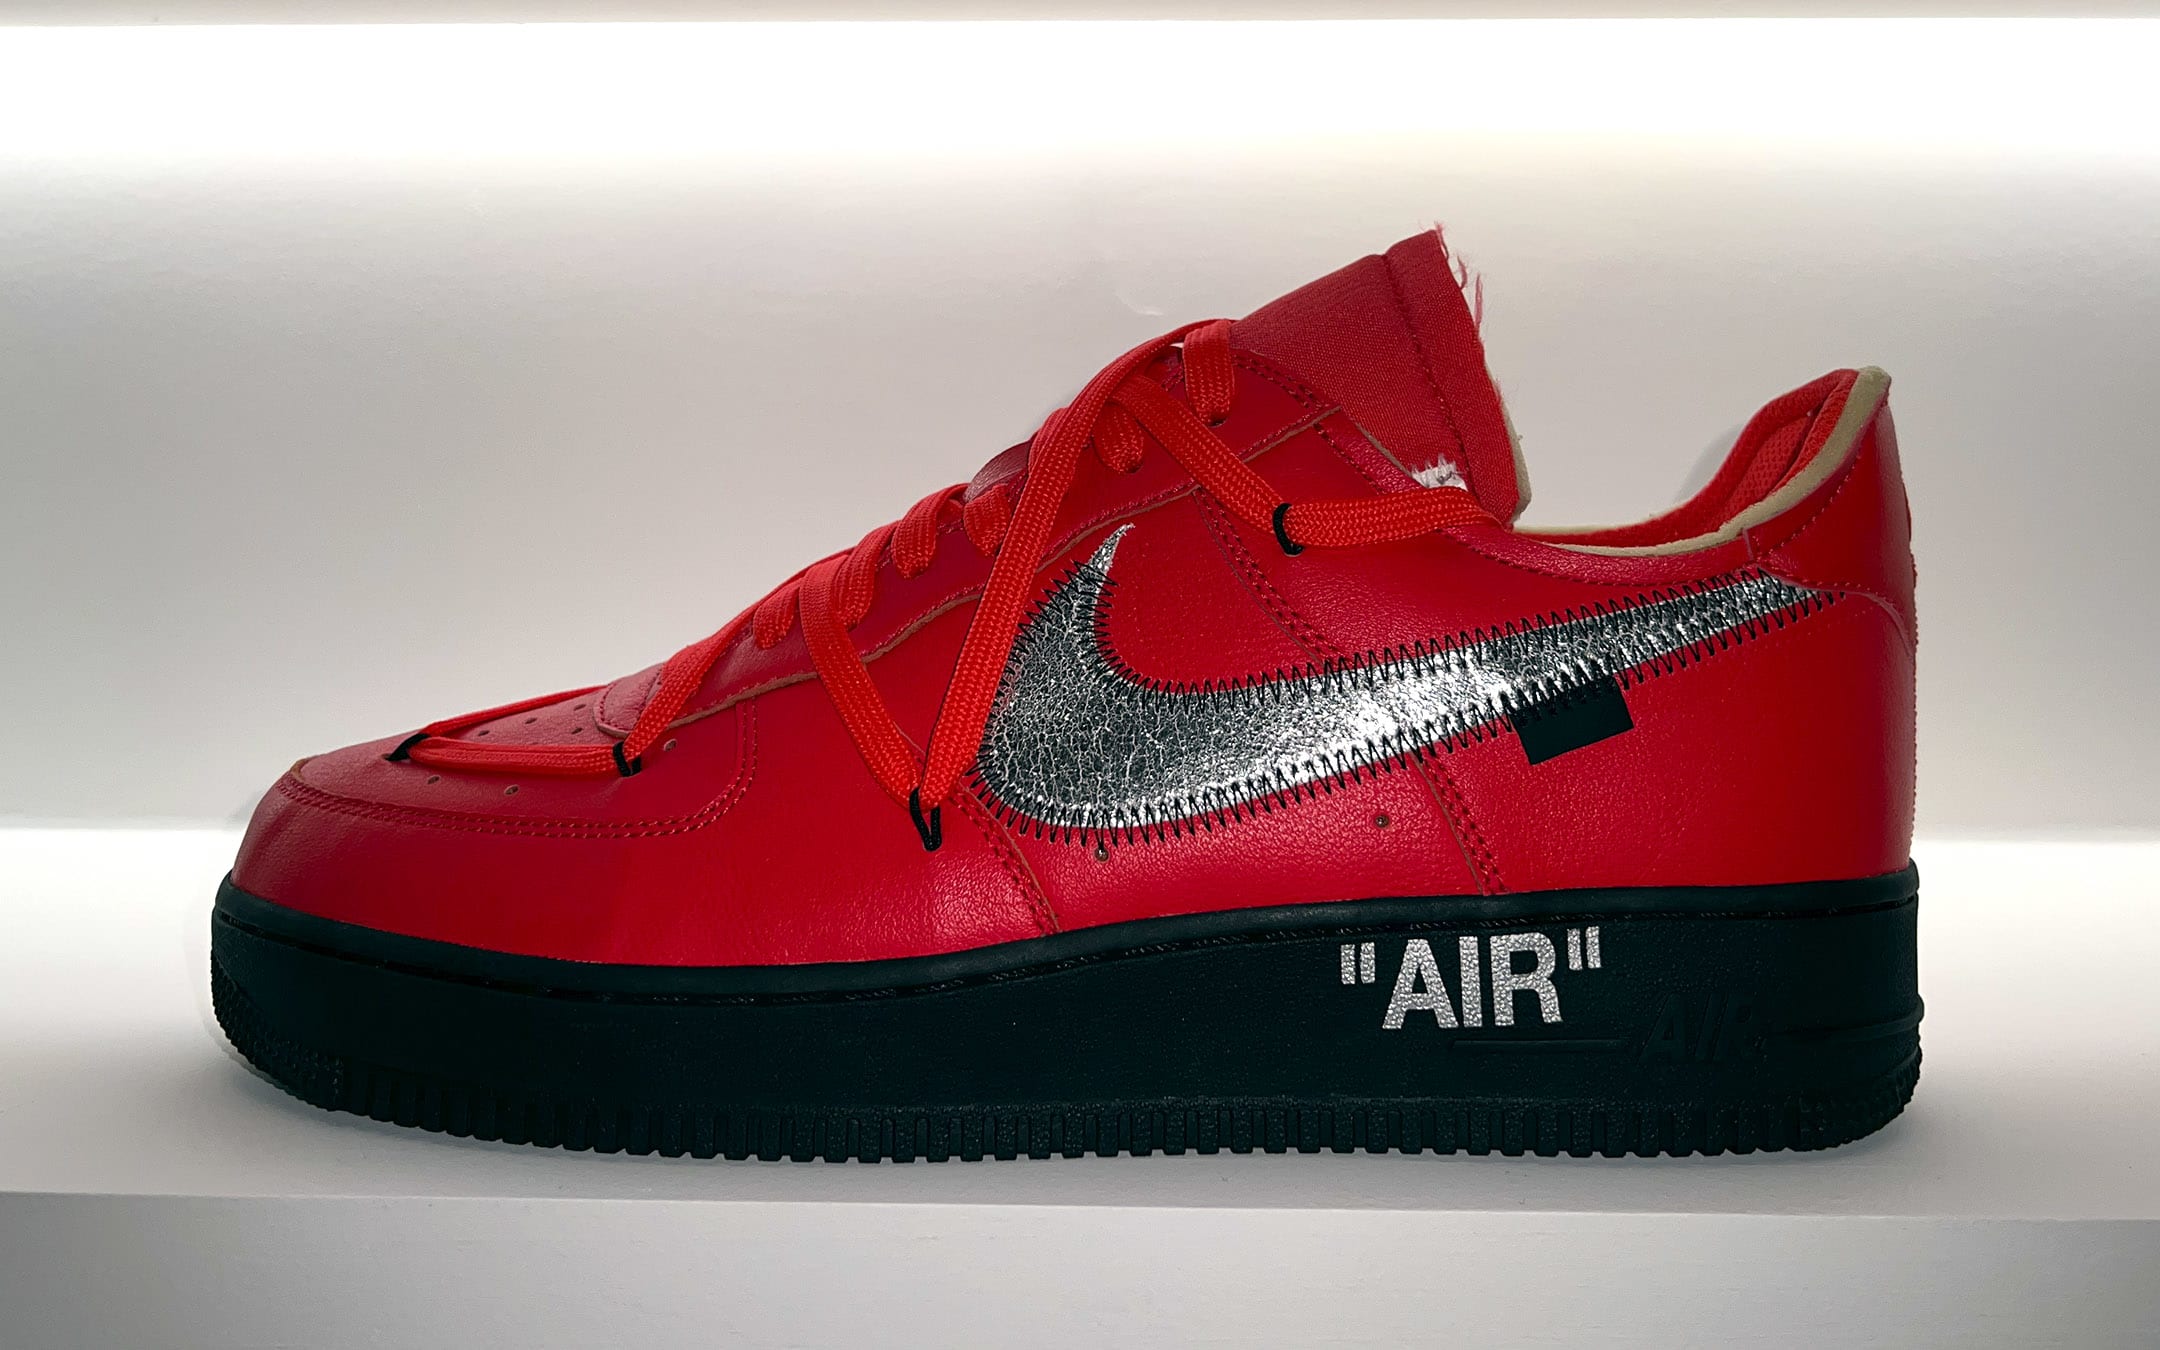 Unreleased Off-White x Nike Air Force 1 Samples on Display at 